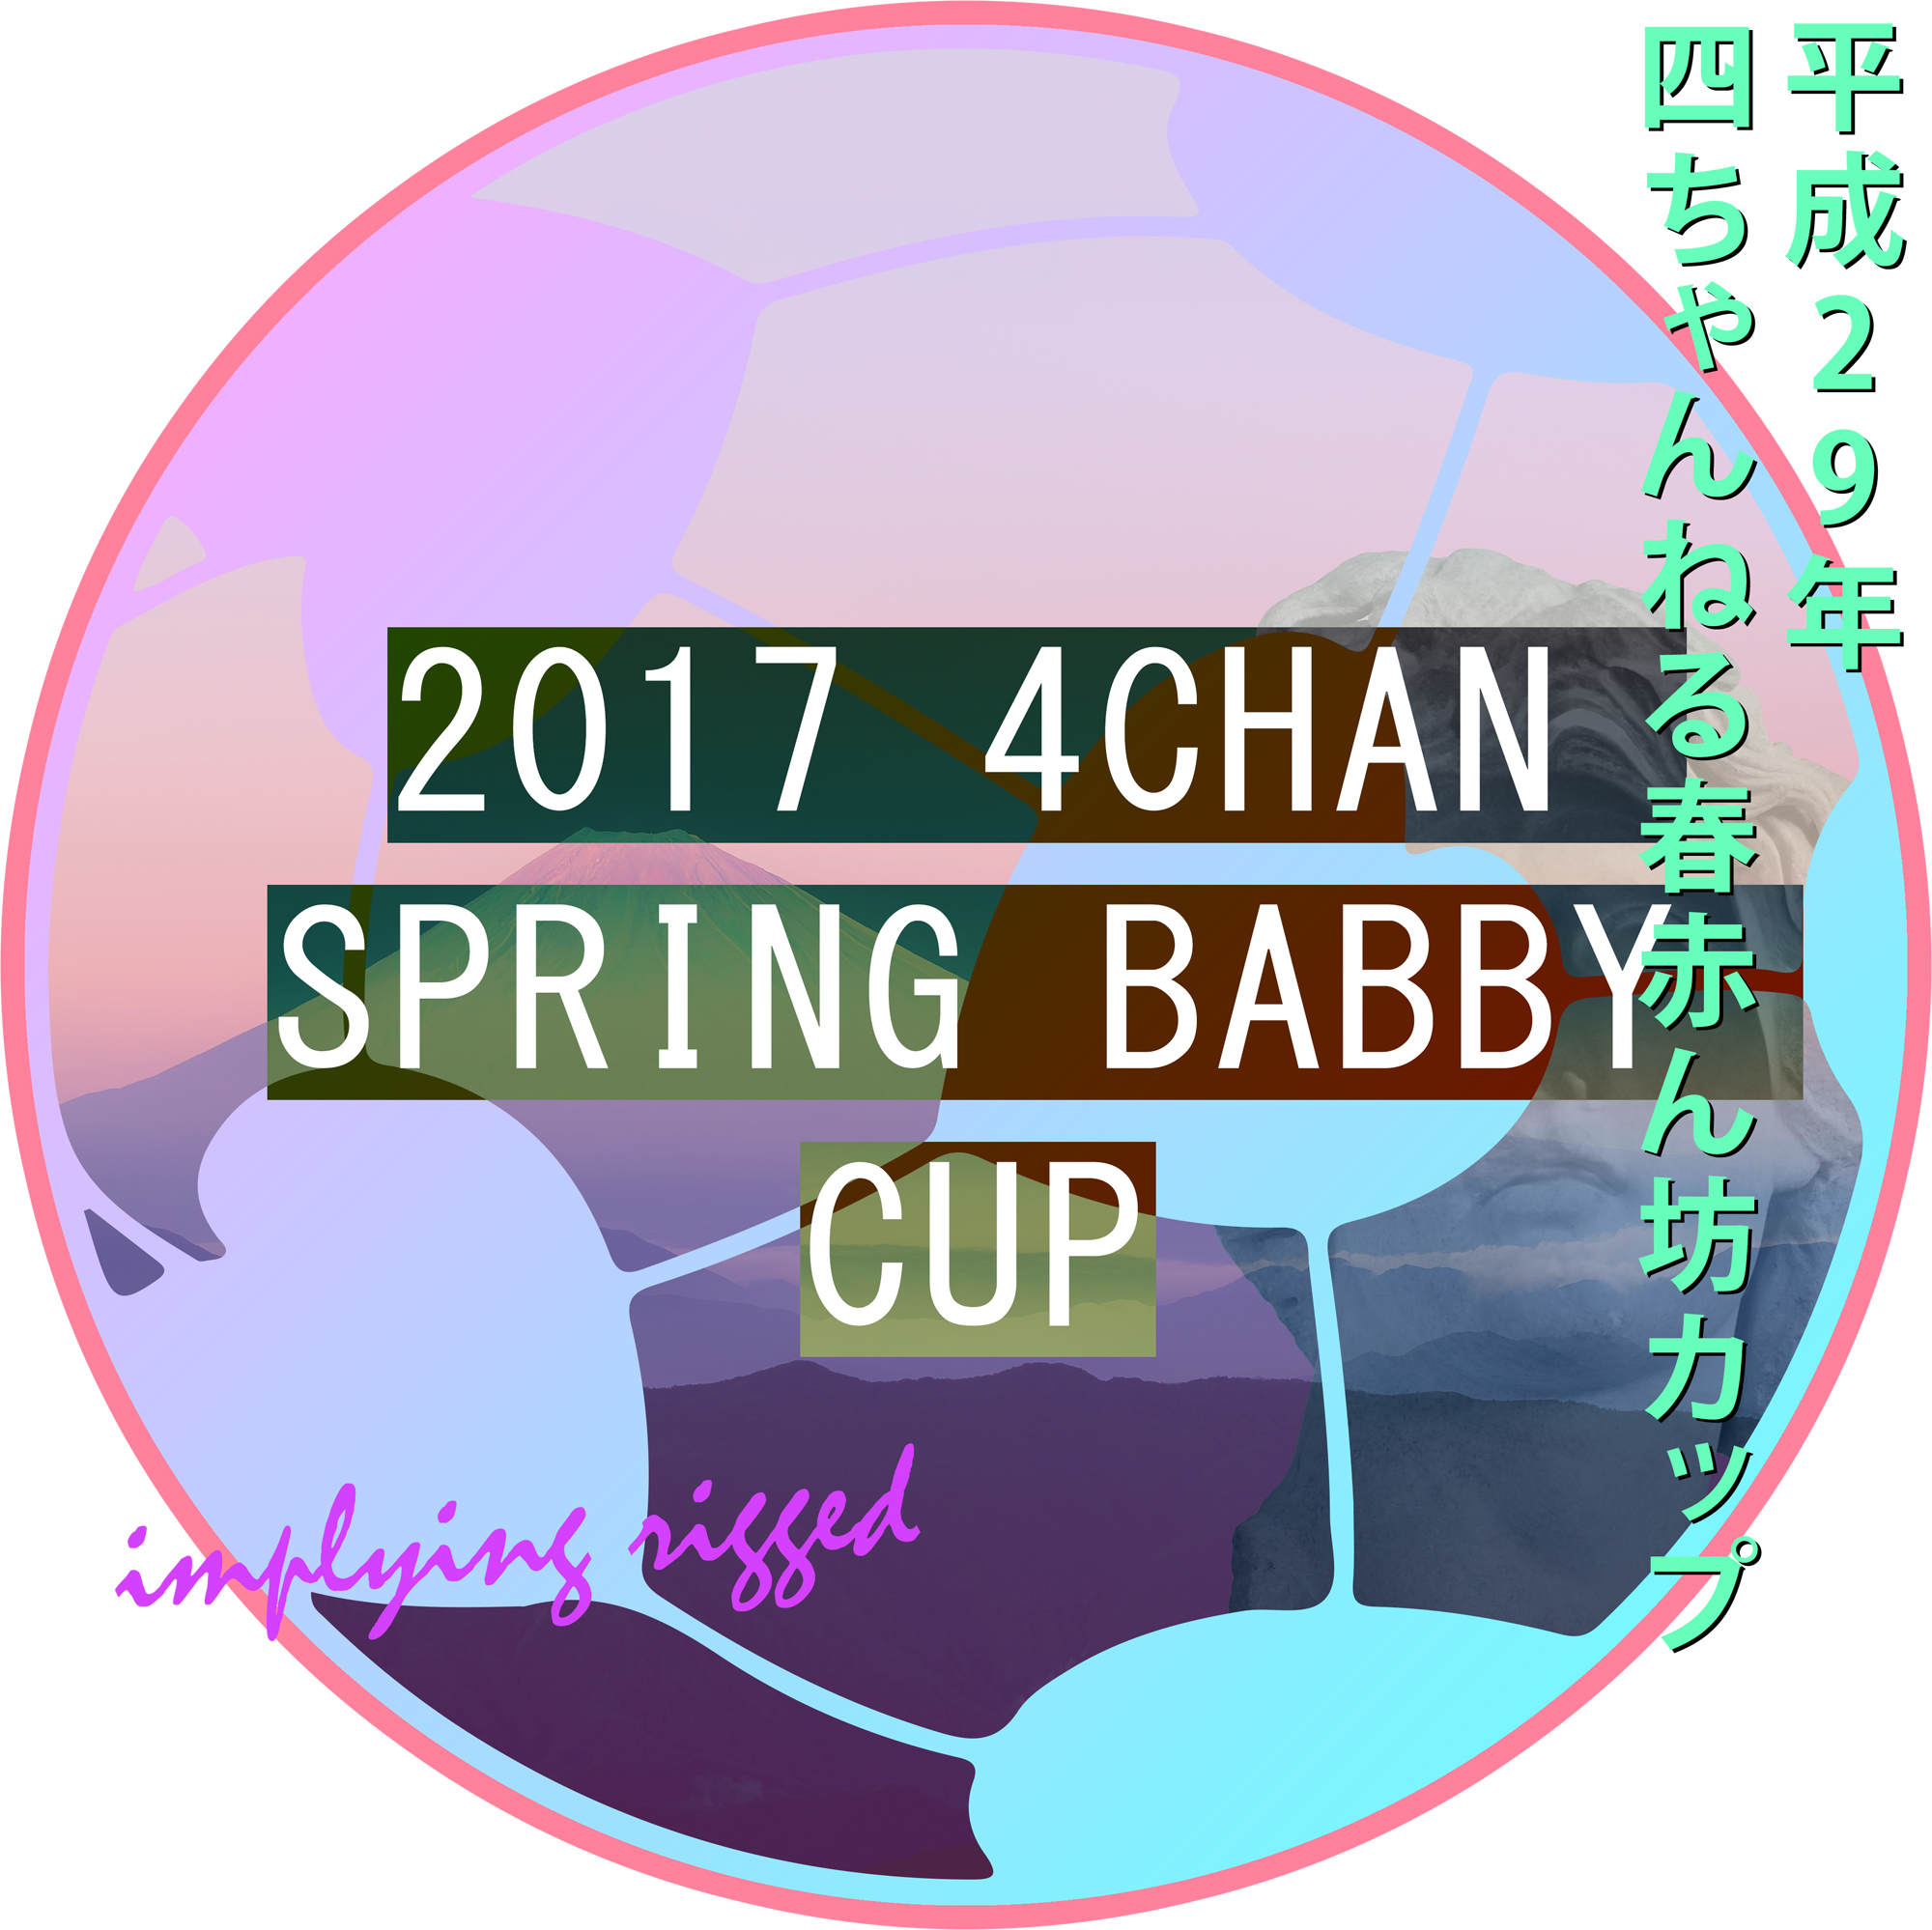 2017 4chan Spring Babby Cup